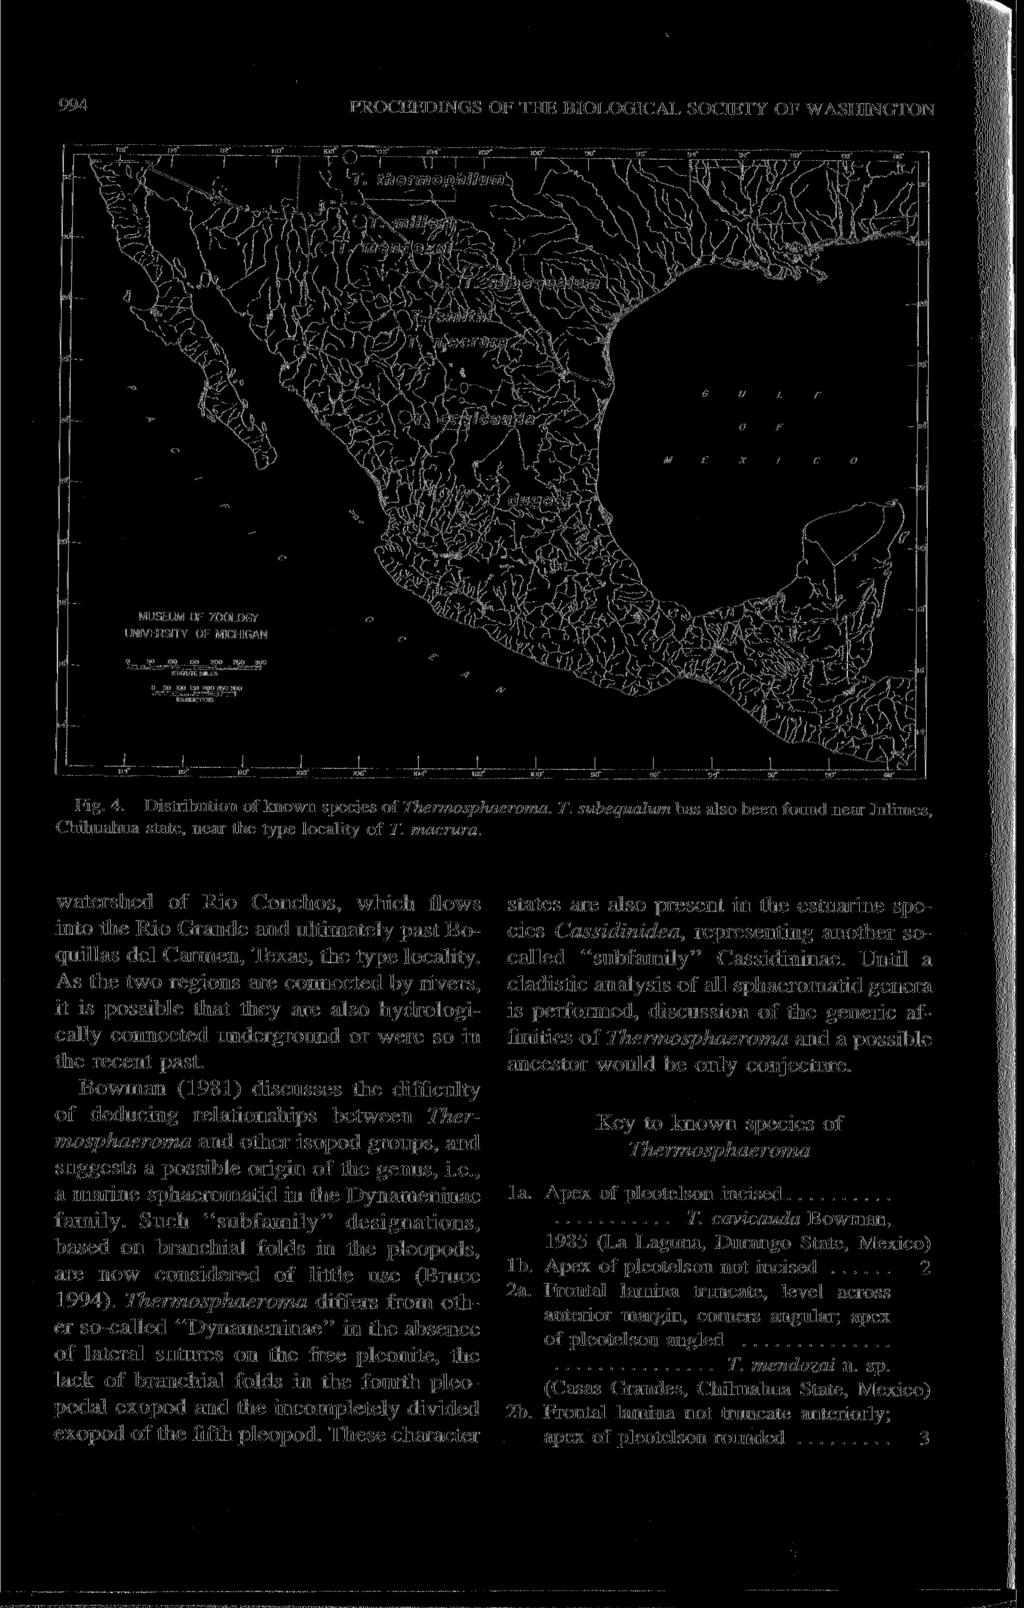 994 PROCEEDINGS OF THE BIOLOGICAL SOCIETY OF WASHINGTON Fig. 4. Distribution of known species of Thermosphaeroma. T. suhequalum has also been found near Julimes, Chihualiua state, near the type locality of T.